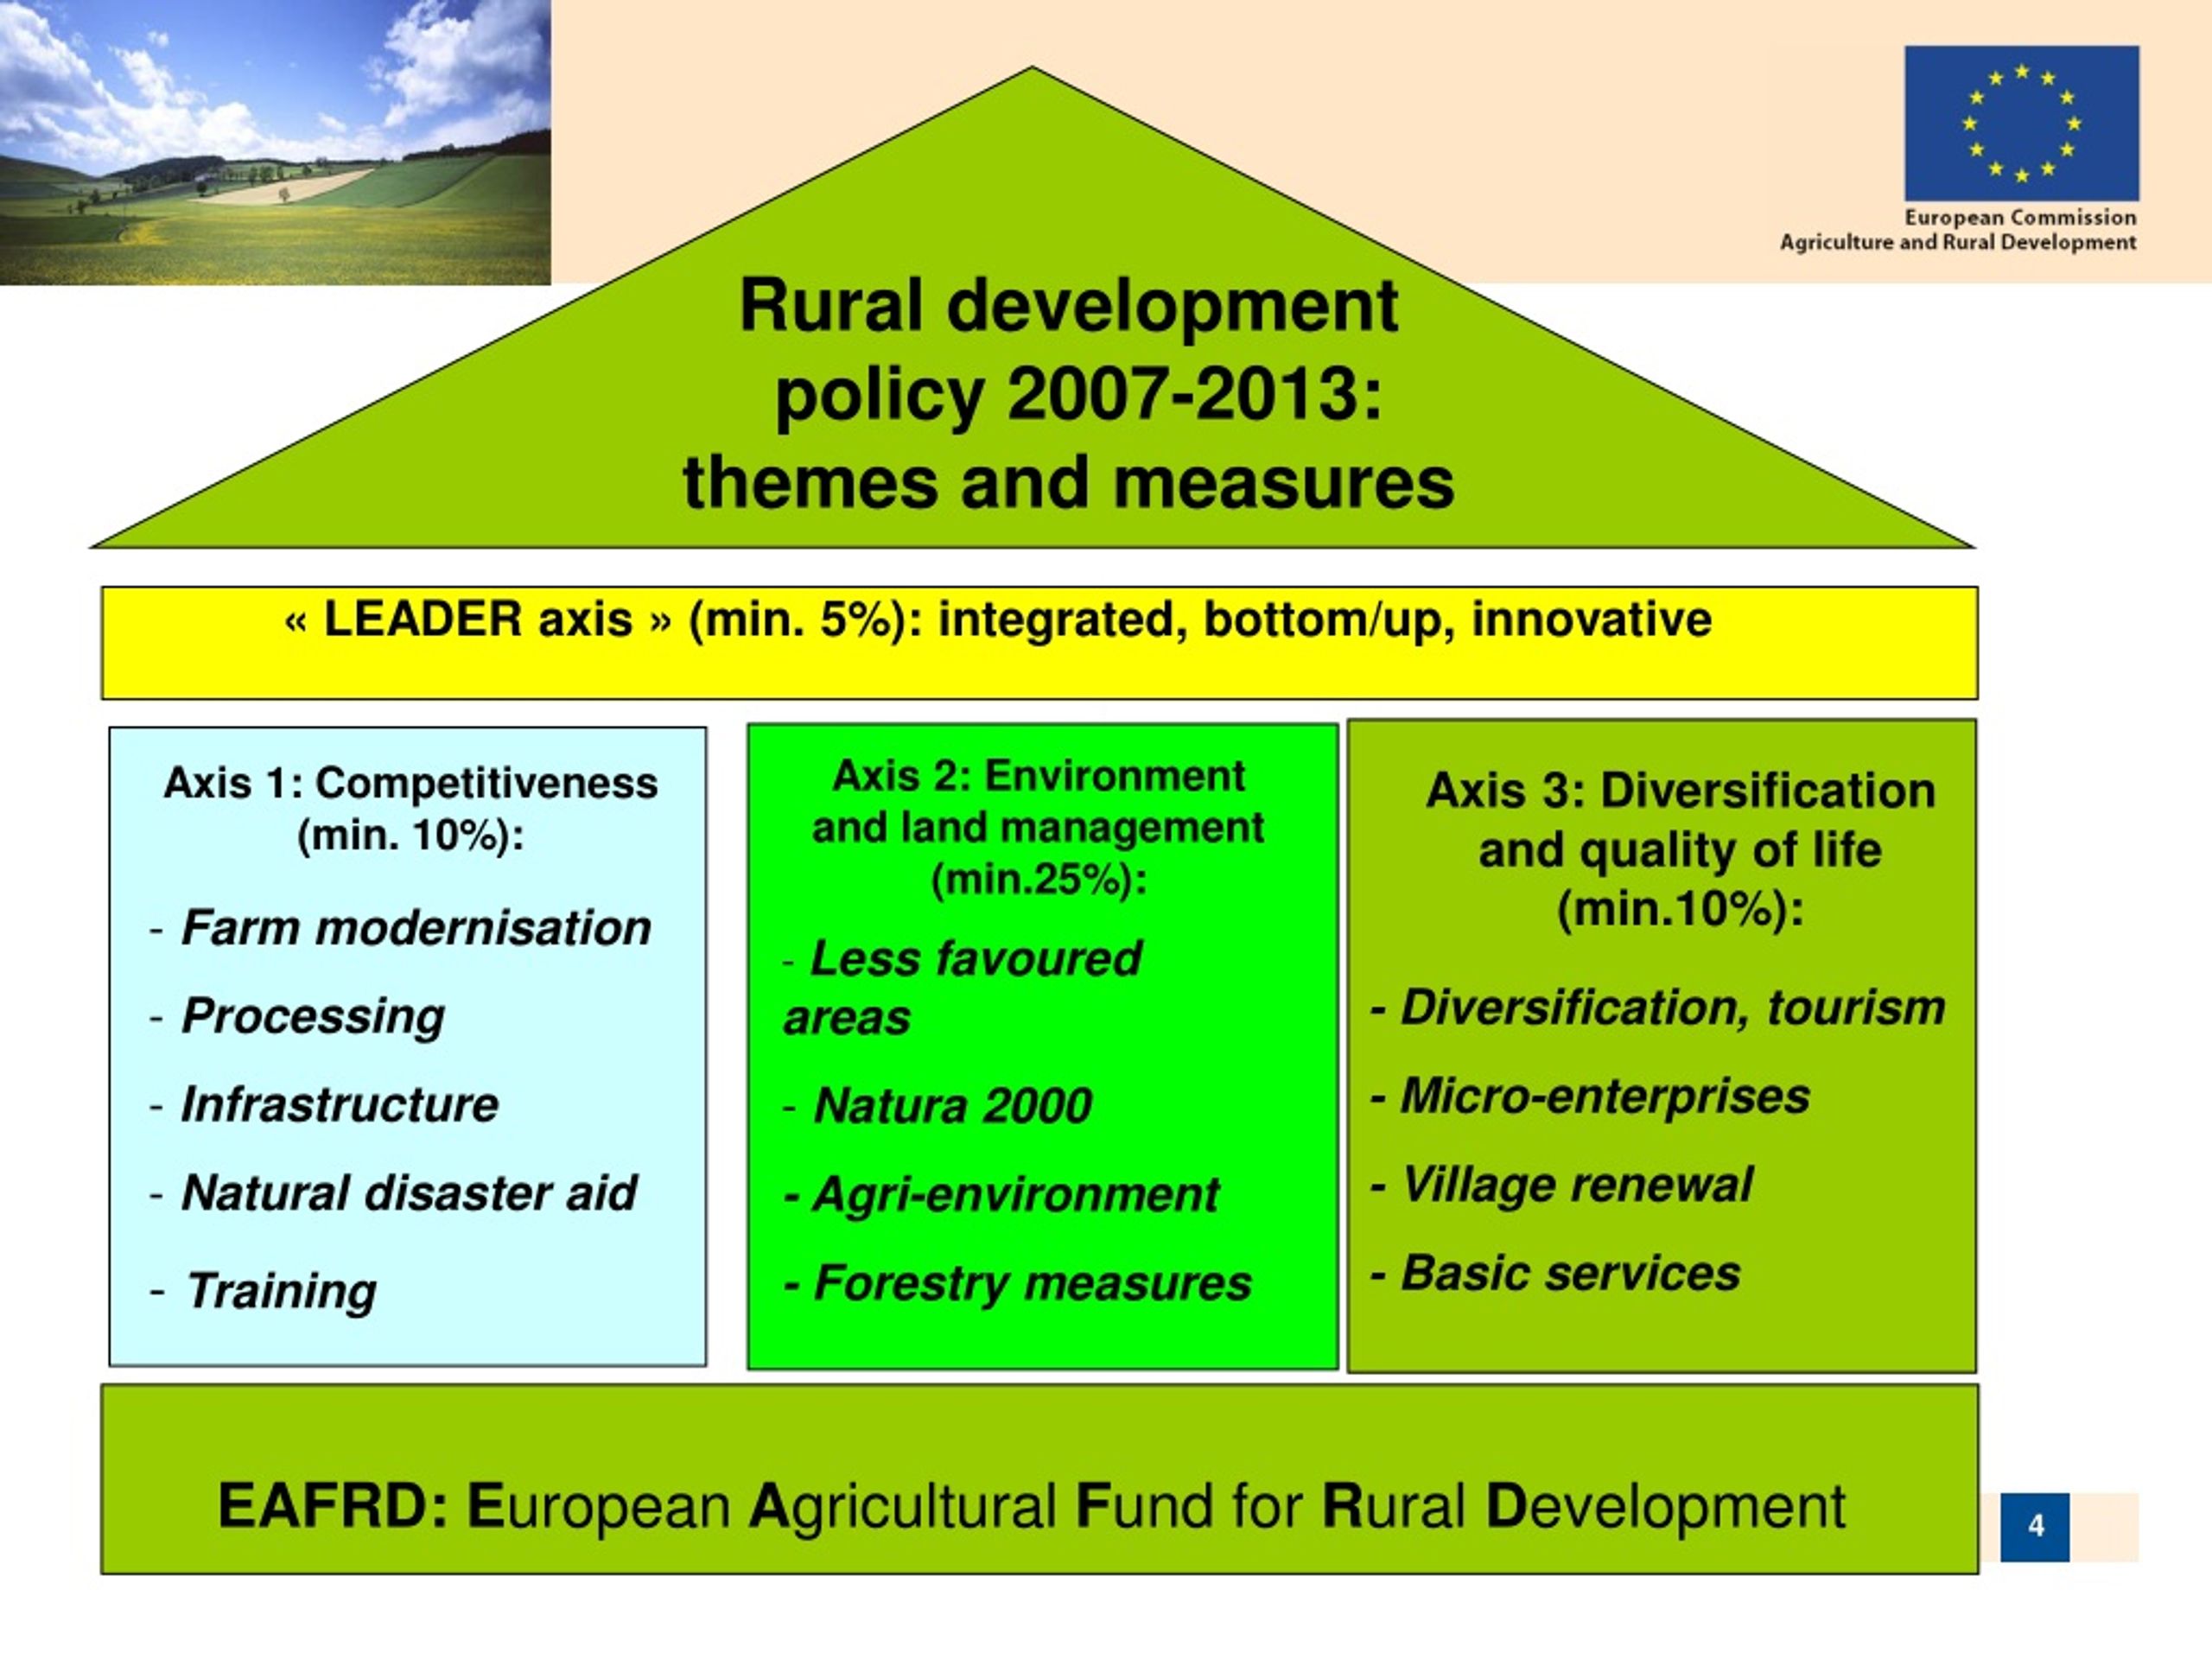 ppt-rural-development-policy-today-and-after-2013-powerpoint